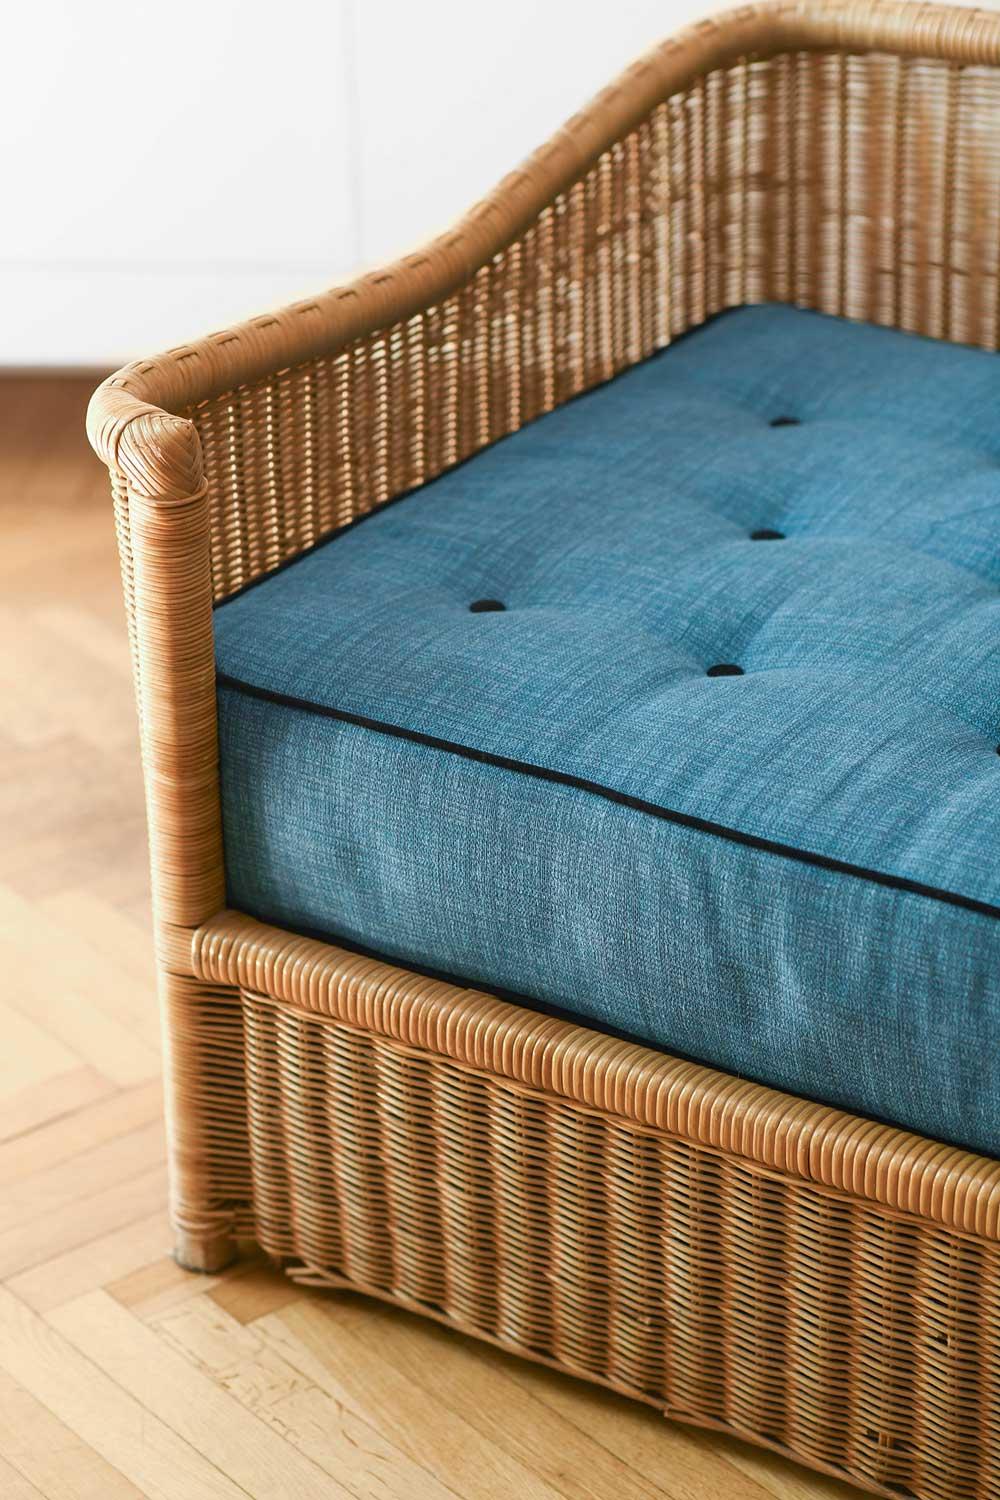 Wicker sofa complete with cushion
Product details
Dimensions: 185L x 70H x 90D cm